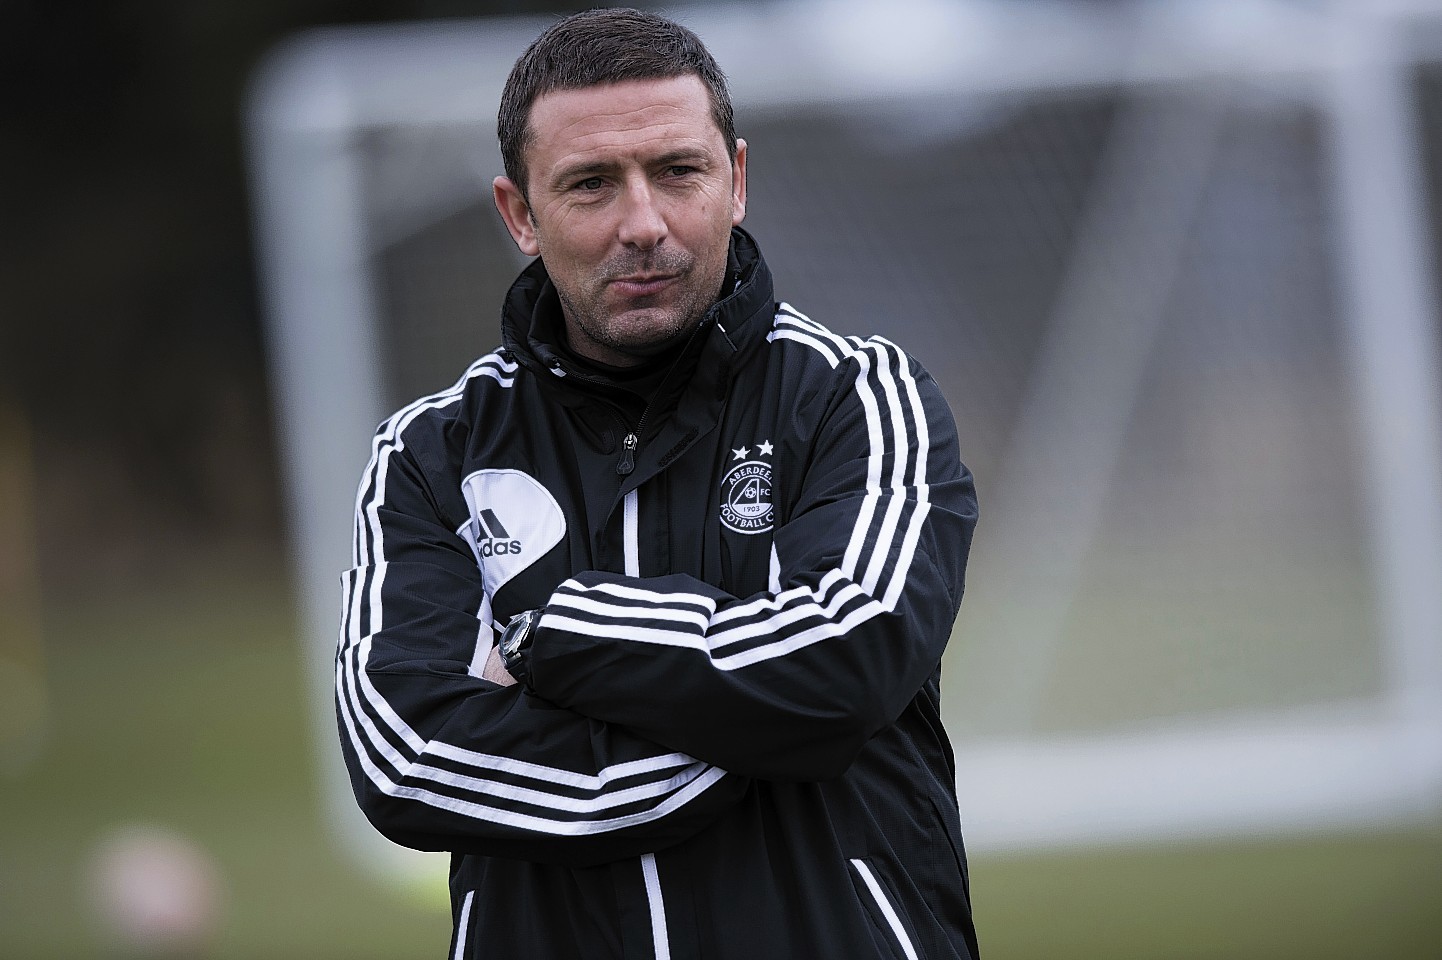 Dons boss Derek McInnes is happy with how his team are playing